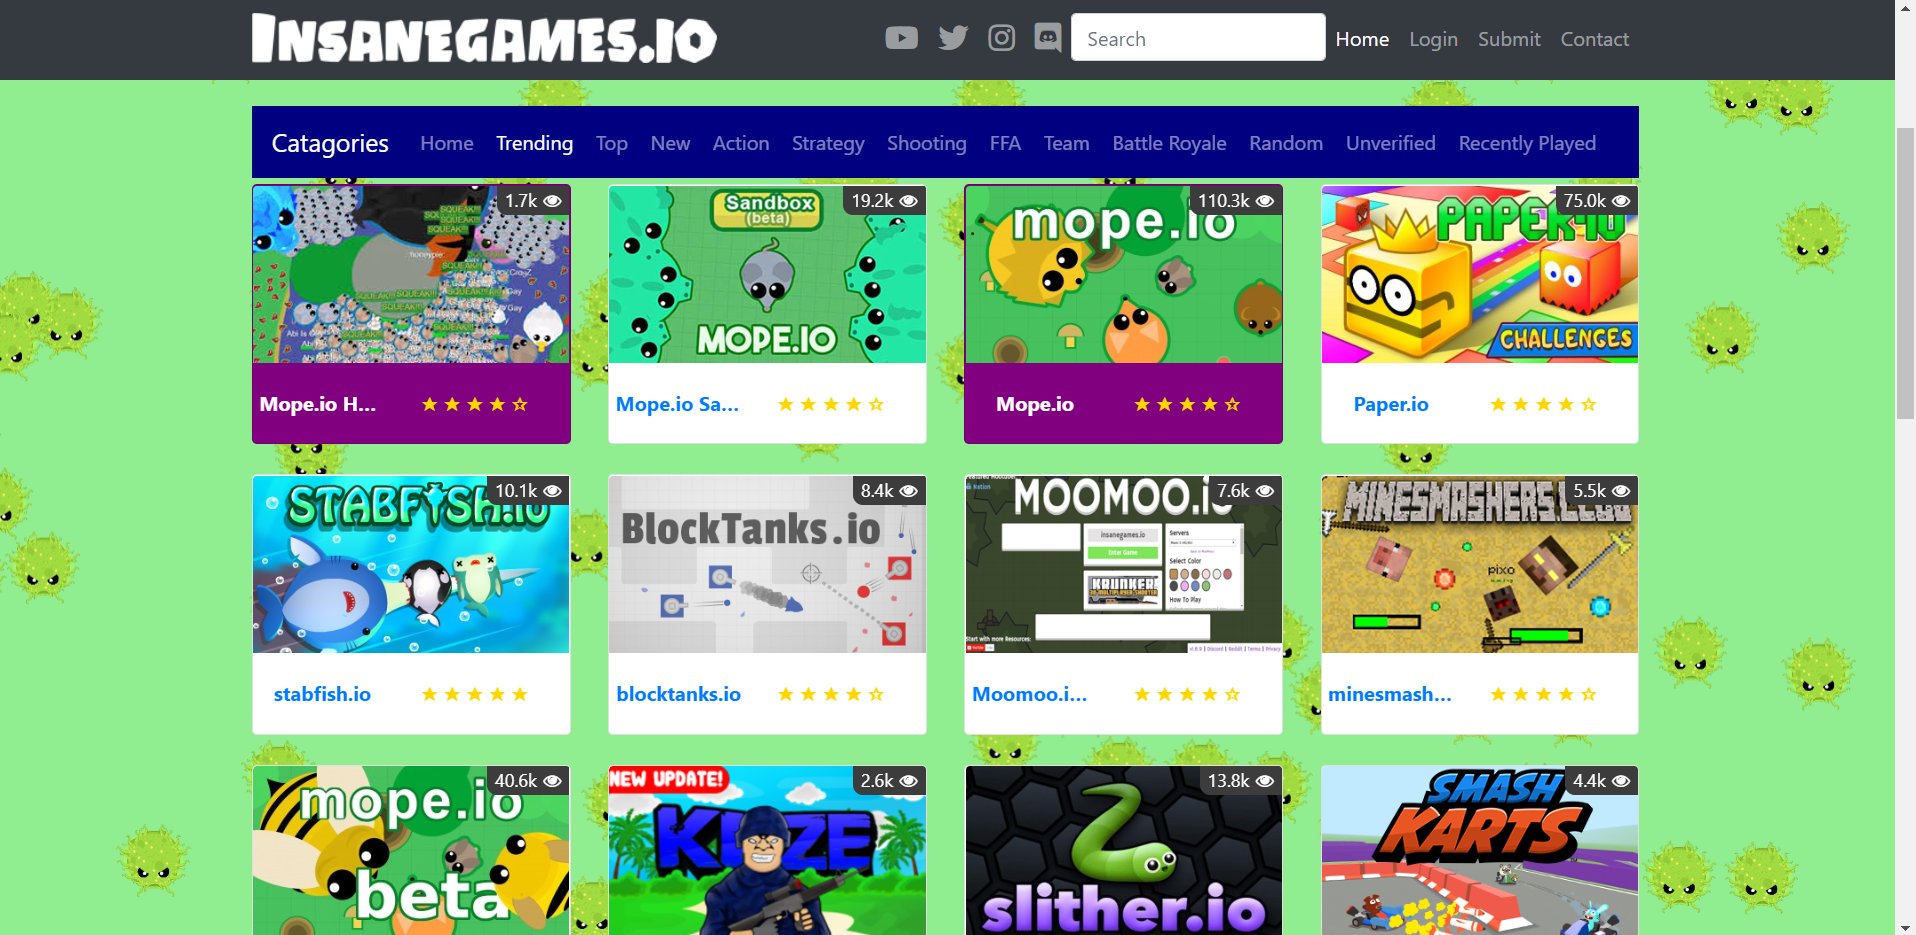 Find the Collection of Best io Games Online for Free on iogames.at